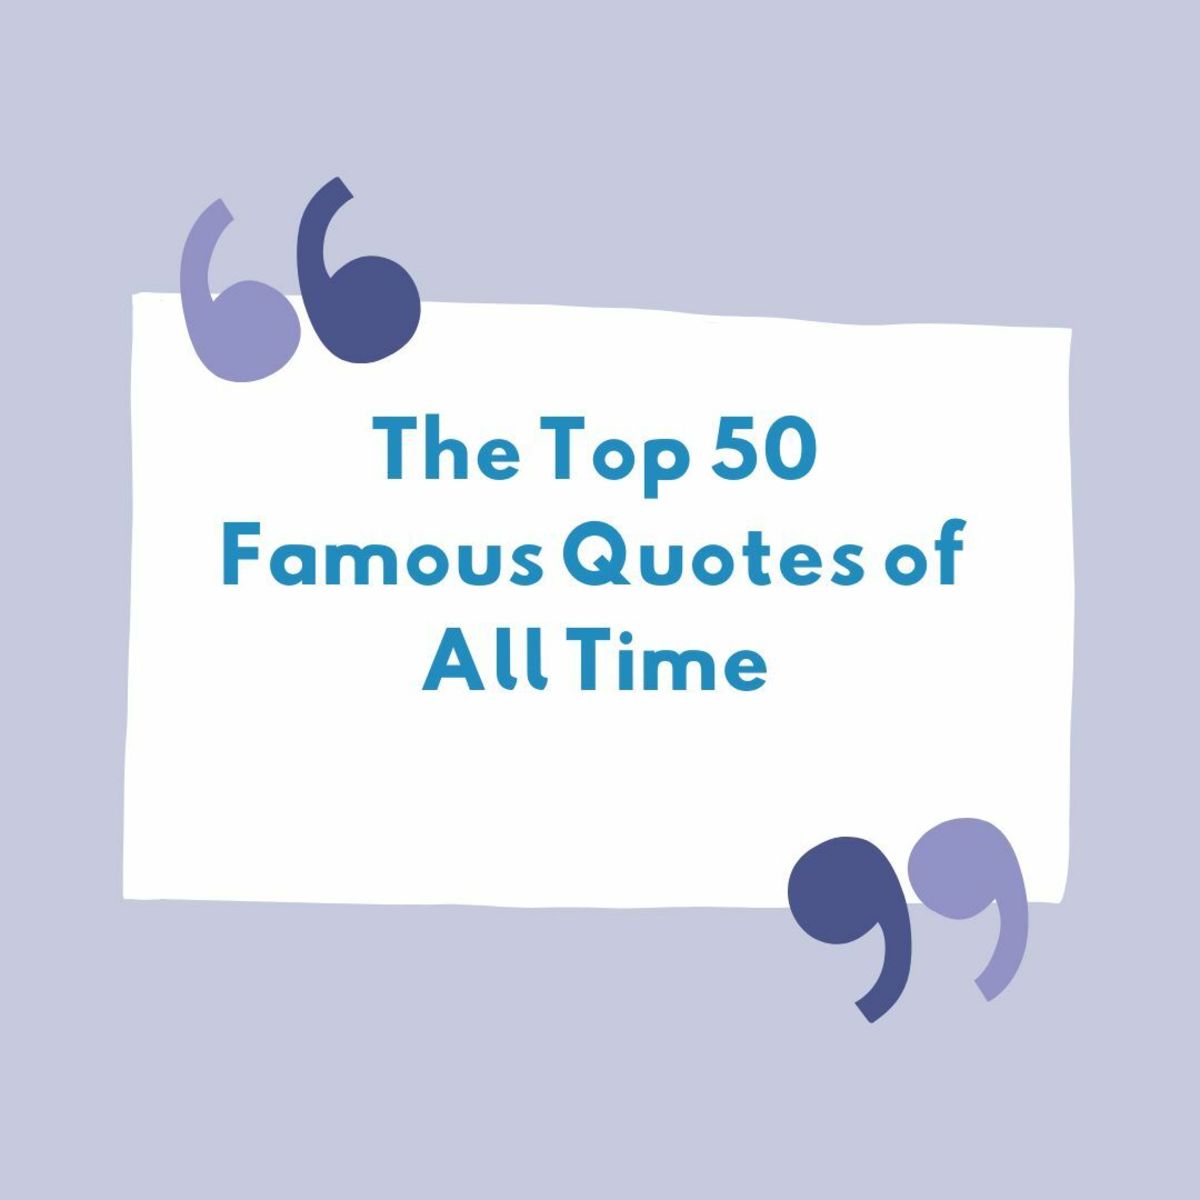 The 50 Top Famous Quotes of All Time